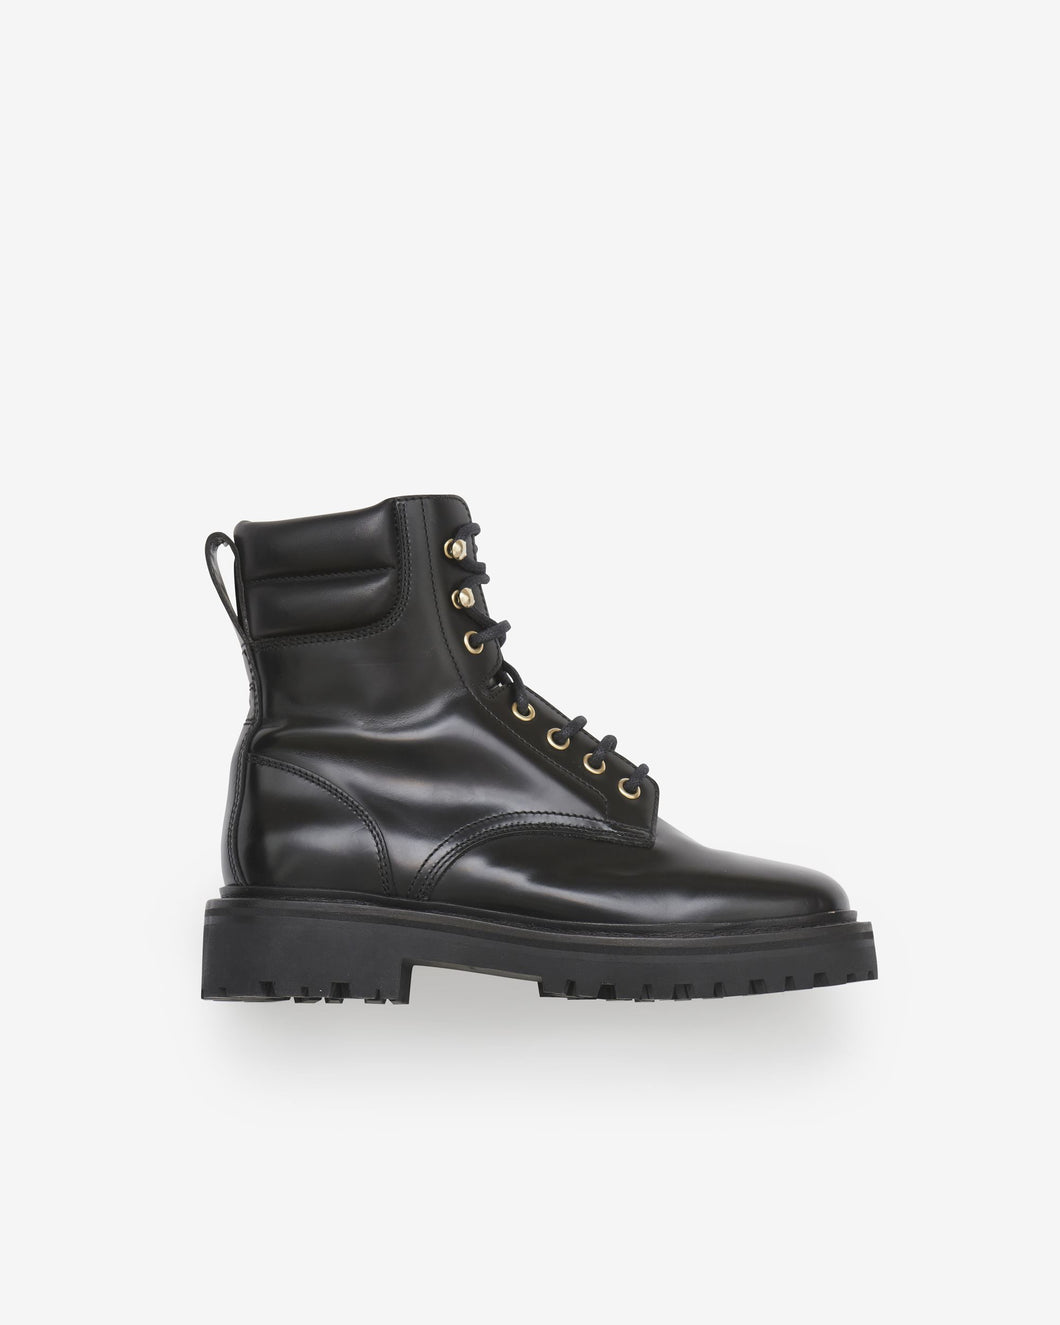 Campa Boots in Black